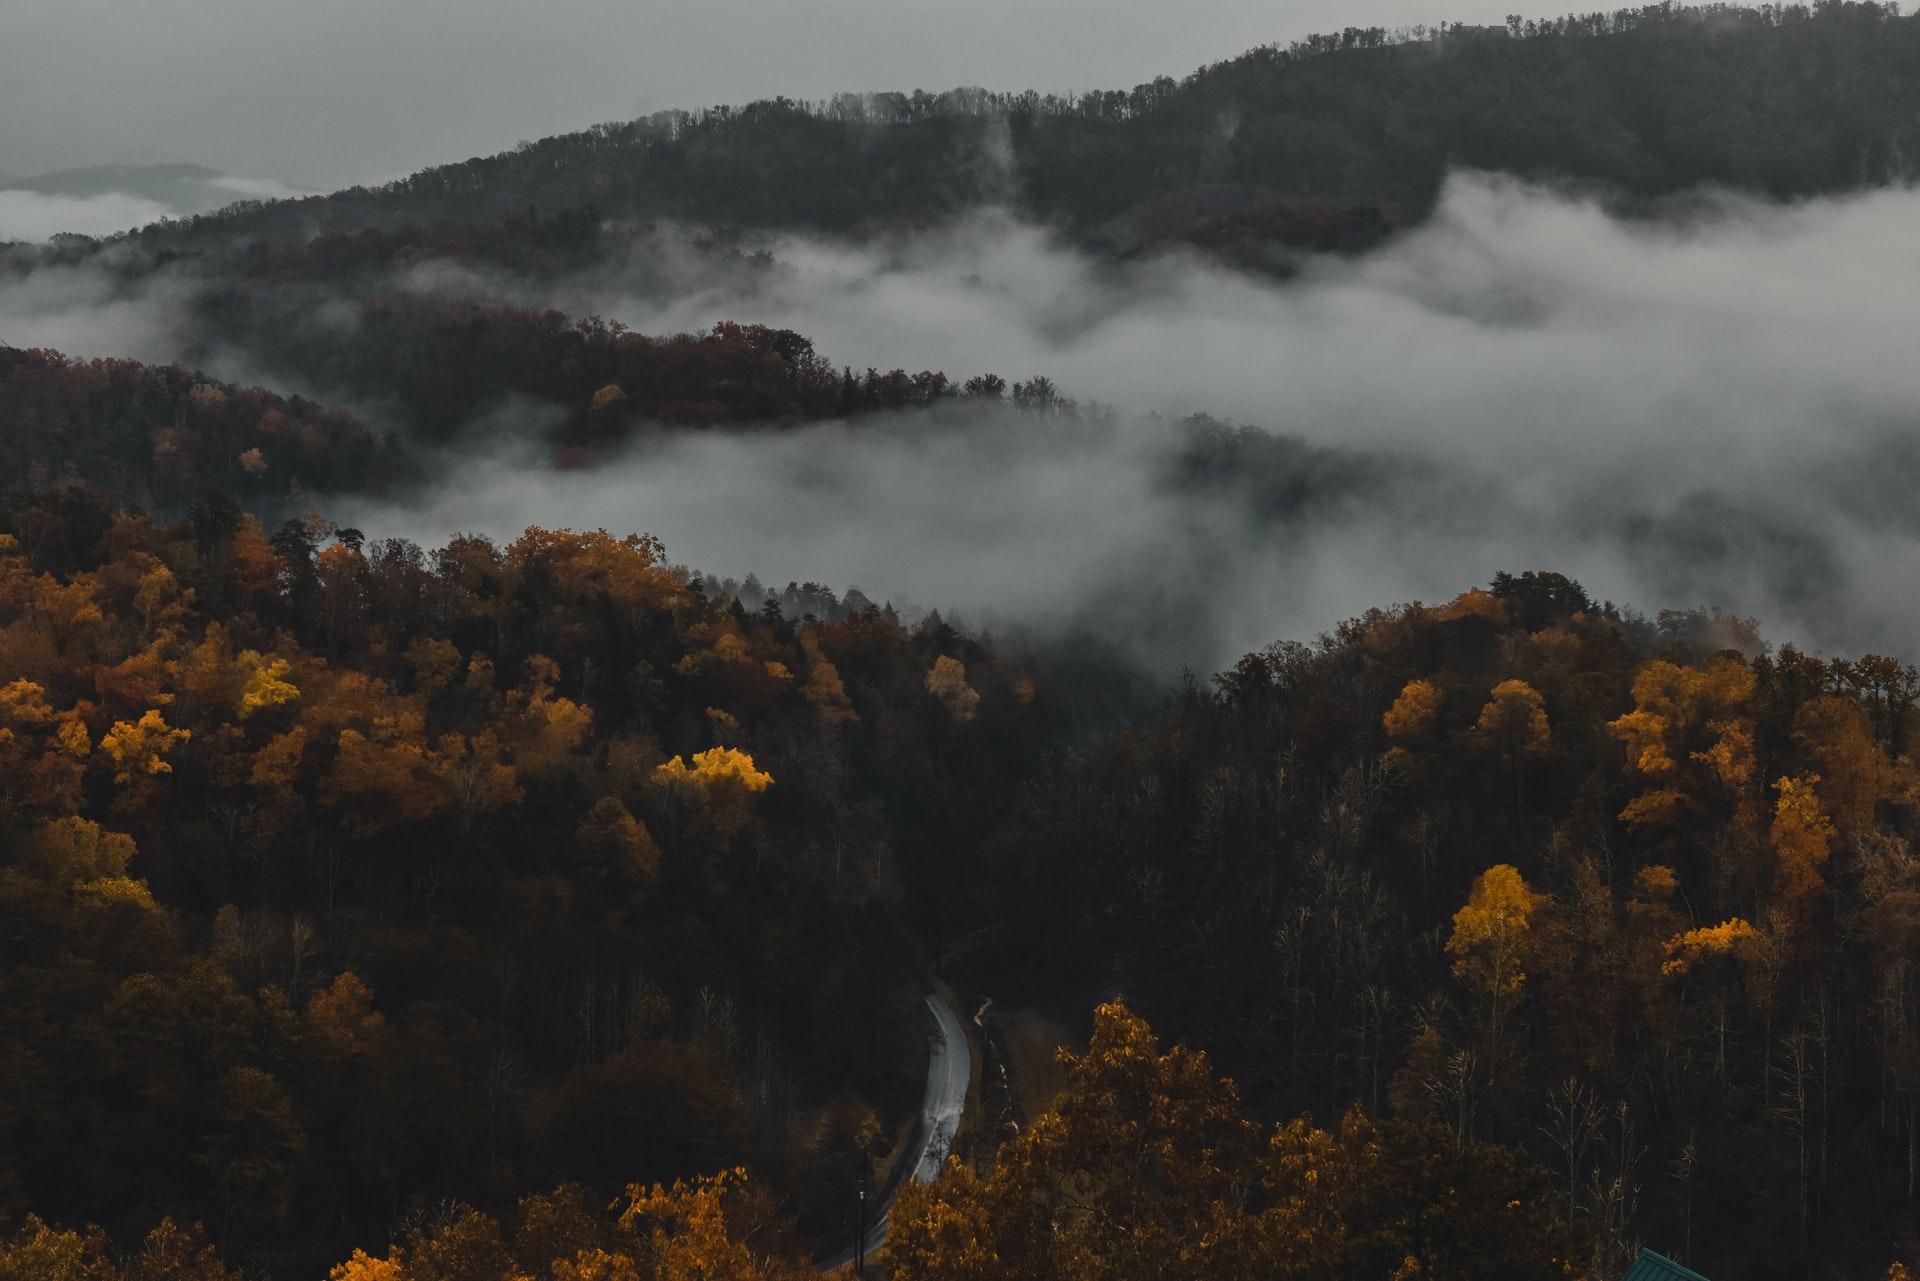 Foggy morning over autumn trees in Great Smoky Mountains National Park